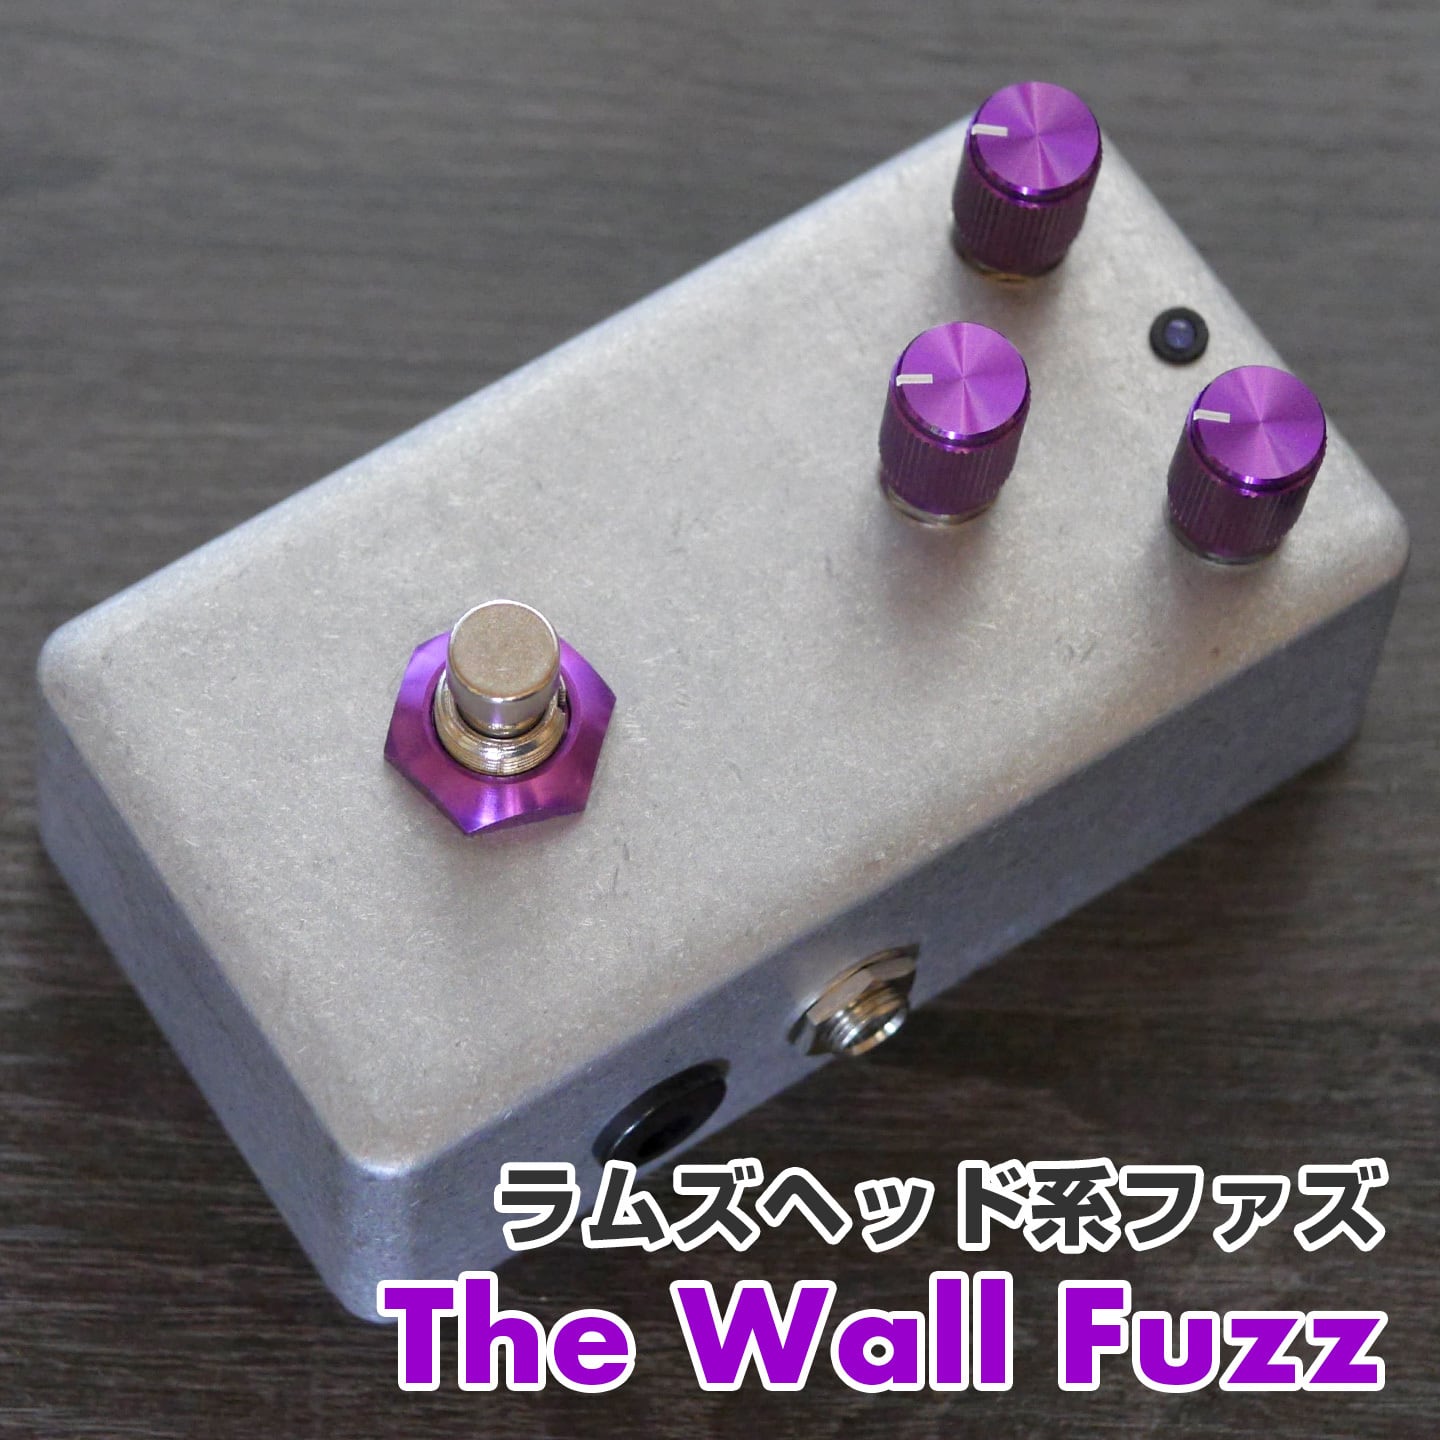 The Wall Fuzz"The Wall Fuzz" アメリカンマフ系ファズ《AL STANDARD》